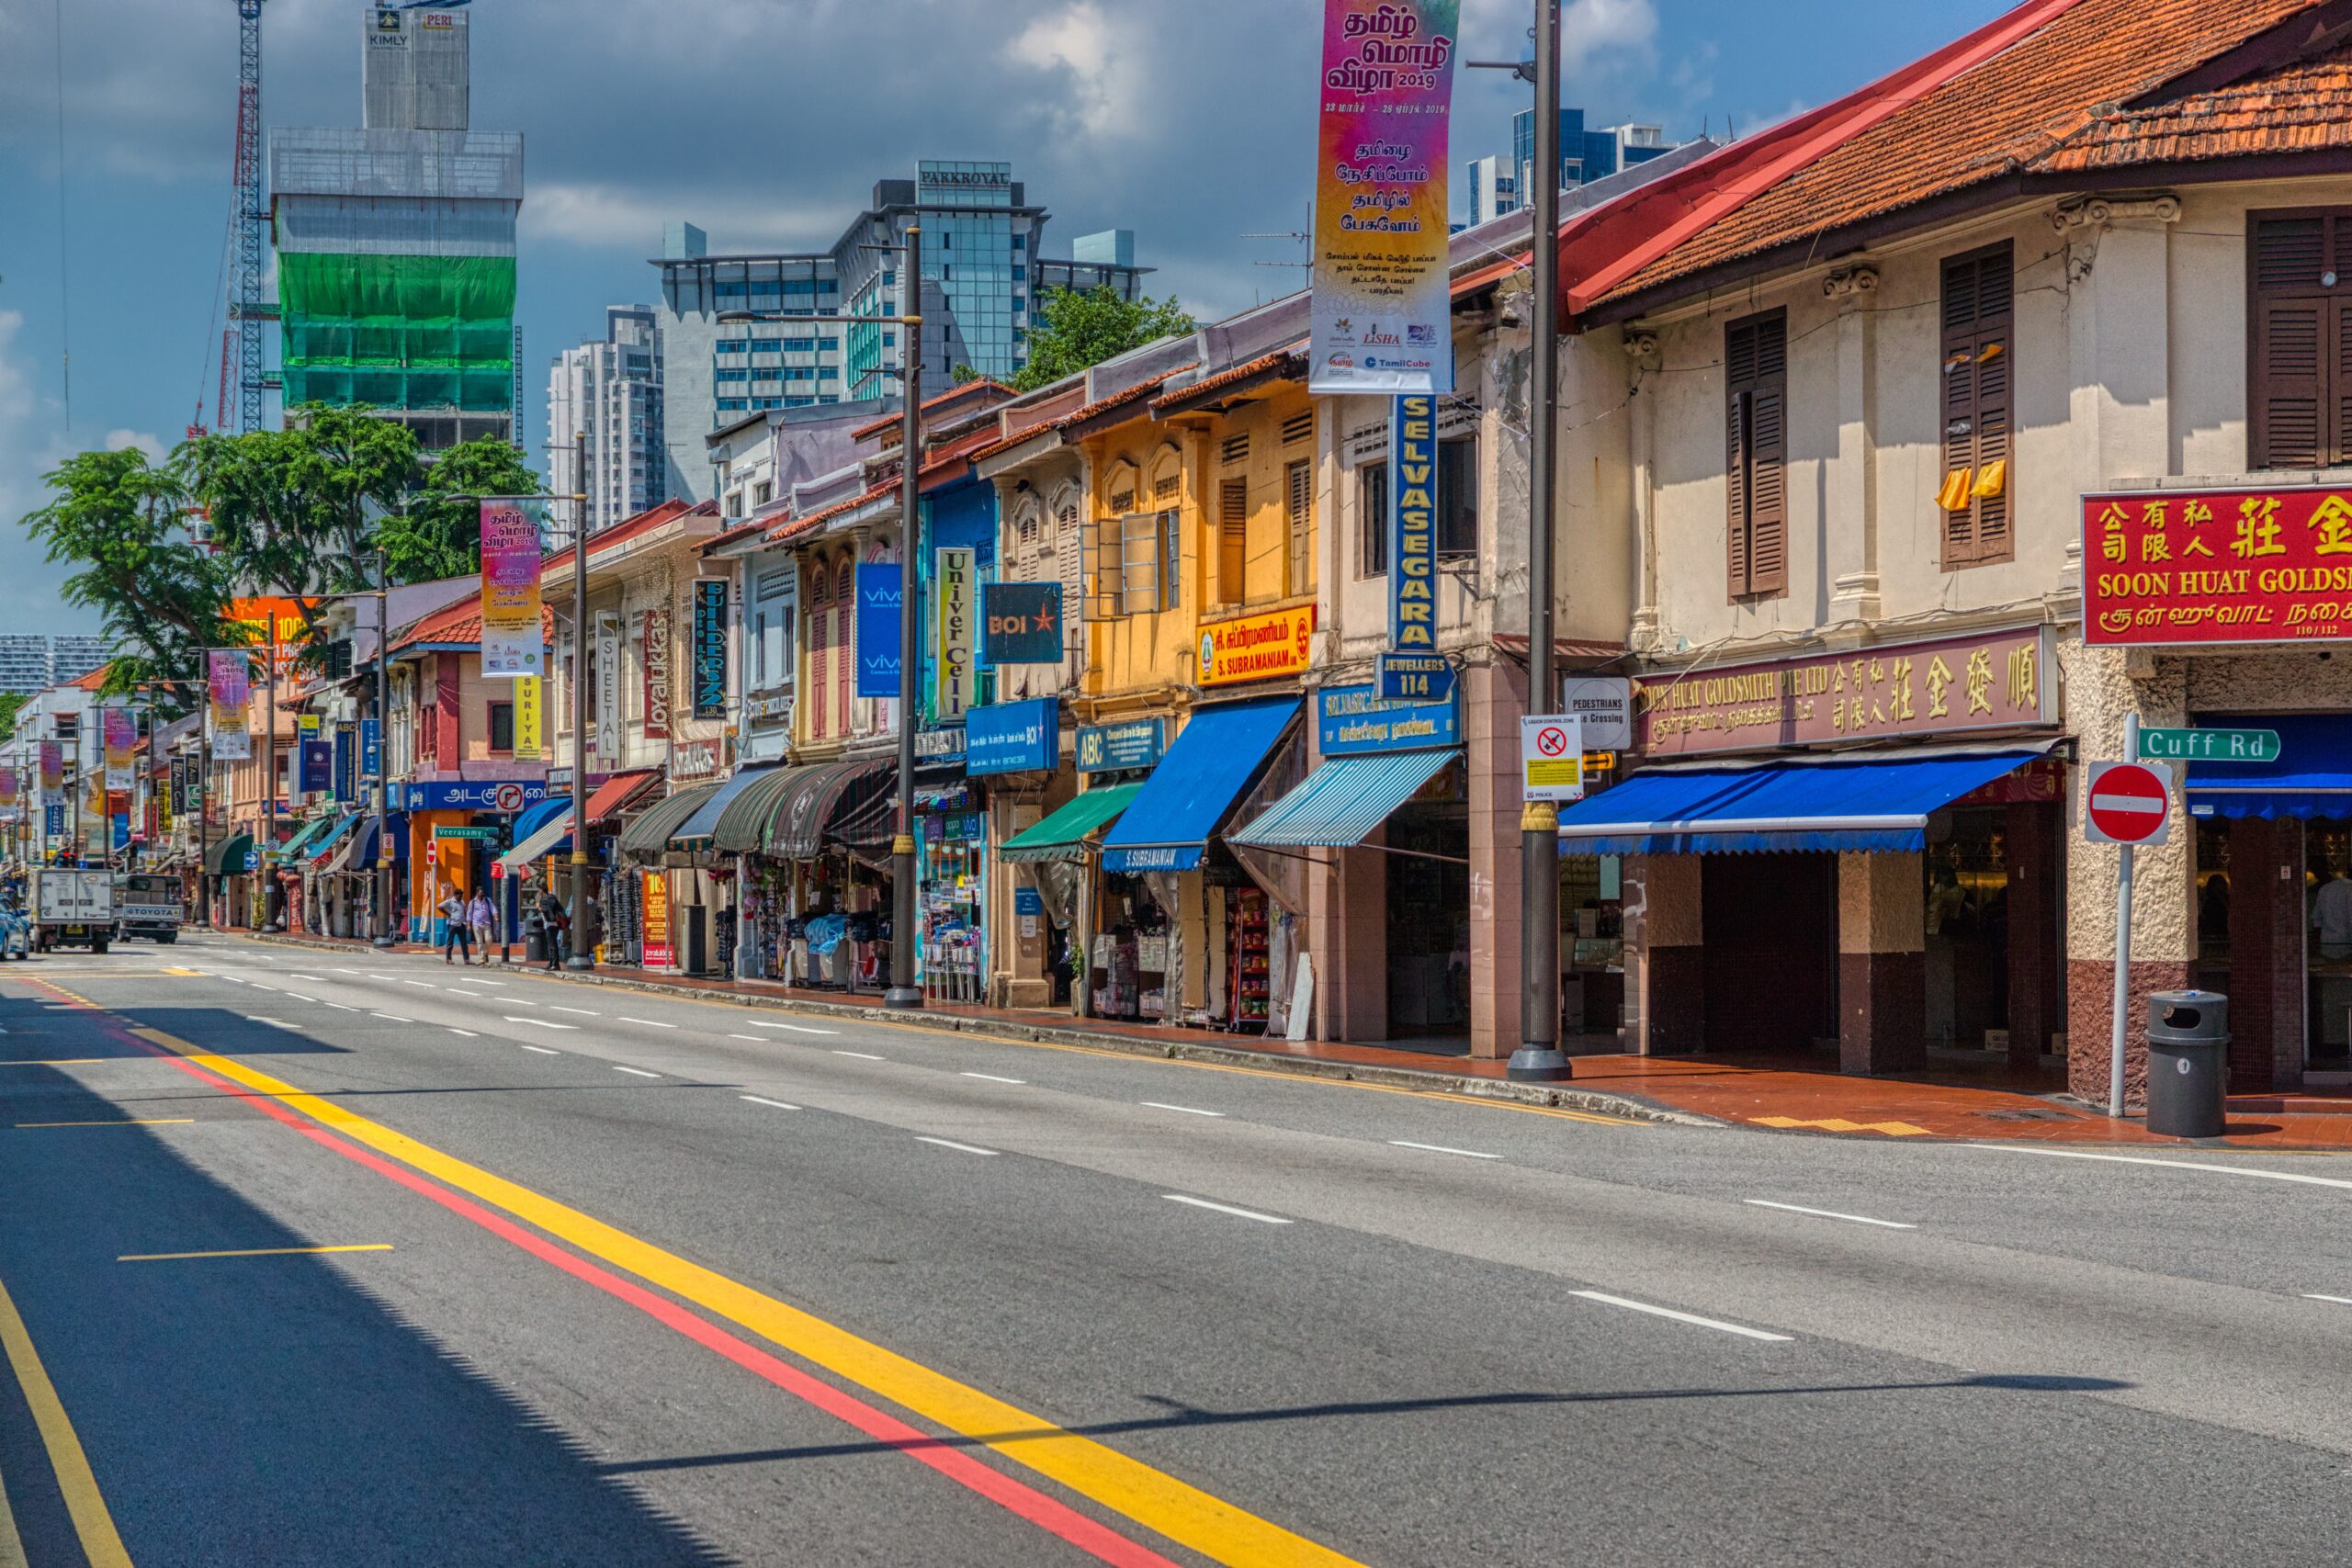 A row of traditional shophouses along the stretch of Serangoon Road